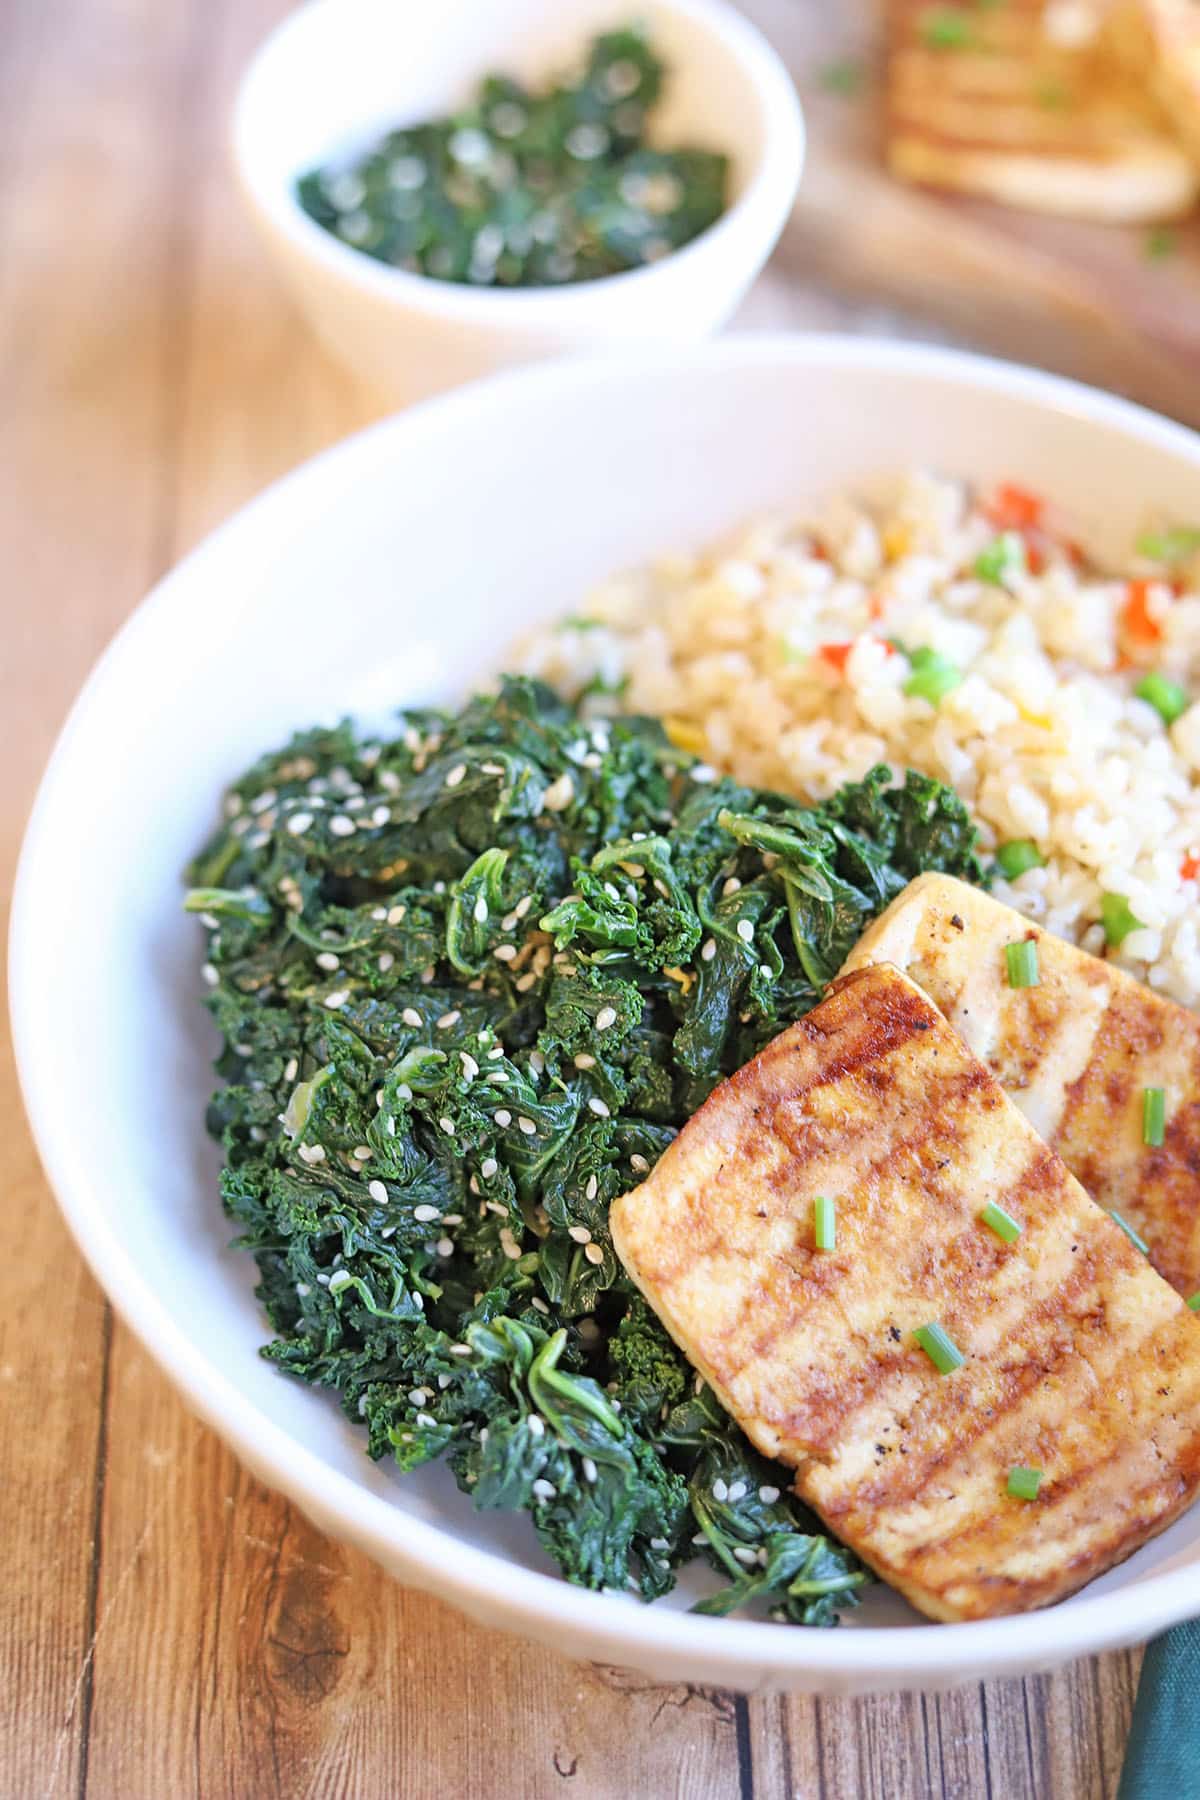 Steamed kale with sesame seeds in bowl with tofu and rice.